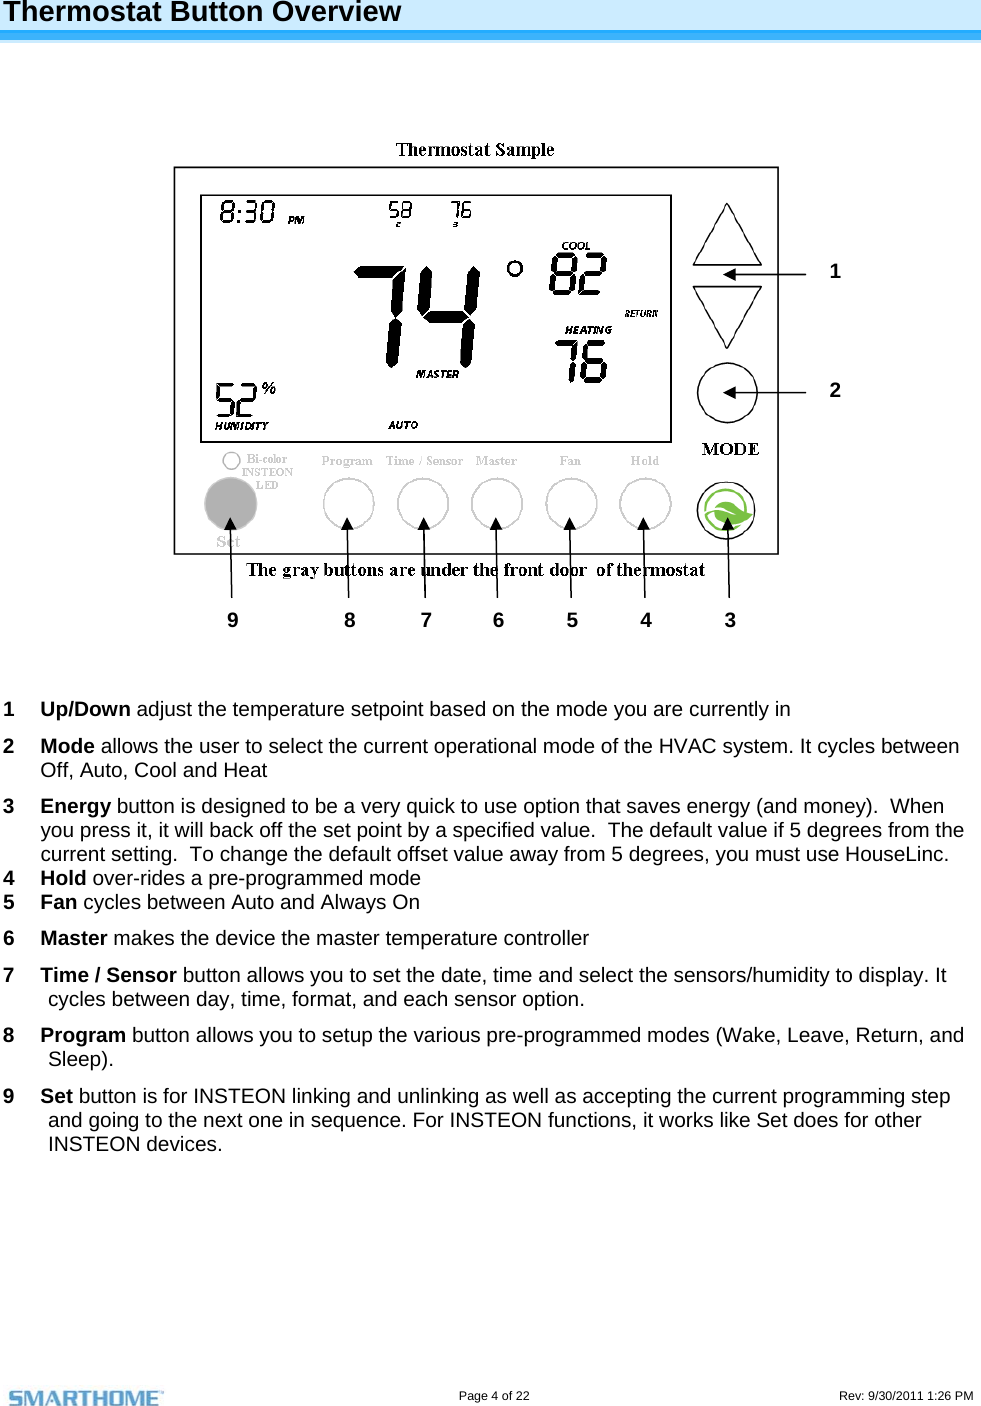                                                                                                                                   Page 4 of 22                                                                                         Rev: 9/30/2011 1:26 PM  Thermostat Button Overview                   1 Up/Down adjust the temperature setpoint based on the mode you are currently in 2 Mode allows the user to select the current operational mode of the HVAC system. It cycles between Off, Auto, Cool and Heat 3 Energy button is designed to be a very quick to use option that saves energy (and money).  When you press it, it will back off the set point by a specified value.  The default value if 5 degrees from the current setting.  To change the default offset value away from 5 degrees, you must use HouseLinc. 4 Hold over-rides a pre-programmed mode 5 Fan cycles between Auto and Always On  6 Master makes the device the master temperature controller 7  Time / Sensor button allows you to set the date, time and select the sensors/humidity to display. It cycles between day, time, format, and each sensor option. 8 Program button allows you to setup the various pre-programmed modes (Wake, Leave, Return, and Sleep).  9 Set button is for INSTEON linking and unlinking as well as accepting the current programming step and going to the next one in sequence. For INSTEON functions, it works like Set does for other INSTEON devices. 2 1 4 5 6 7 8 9  3 